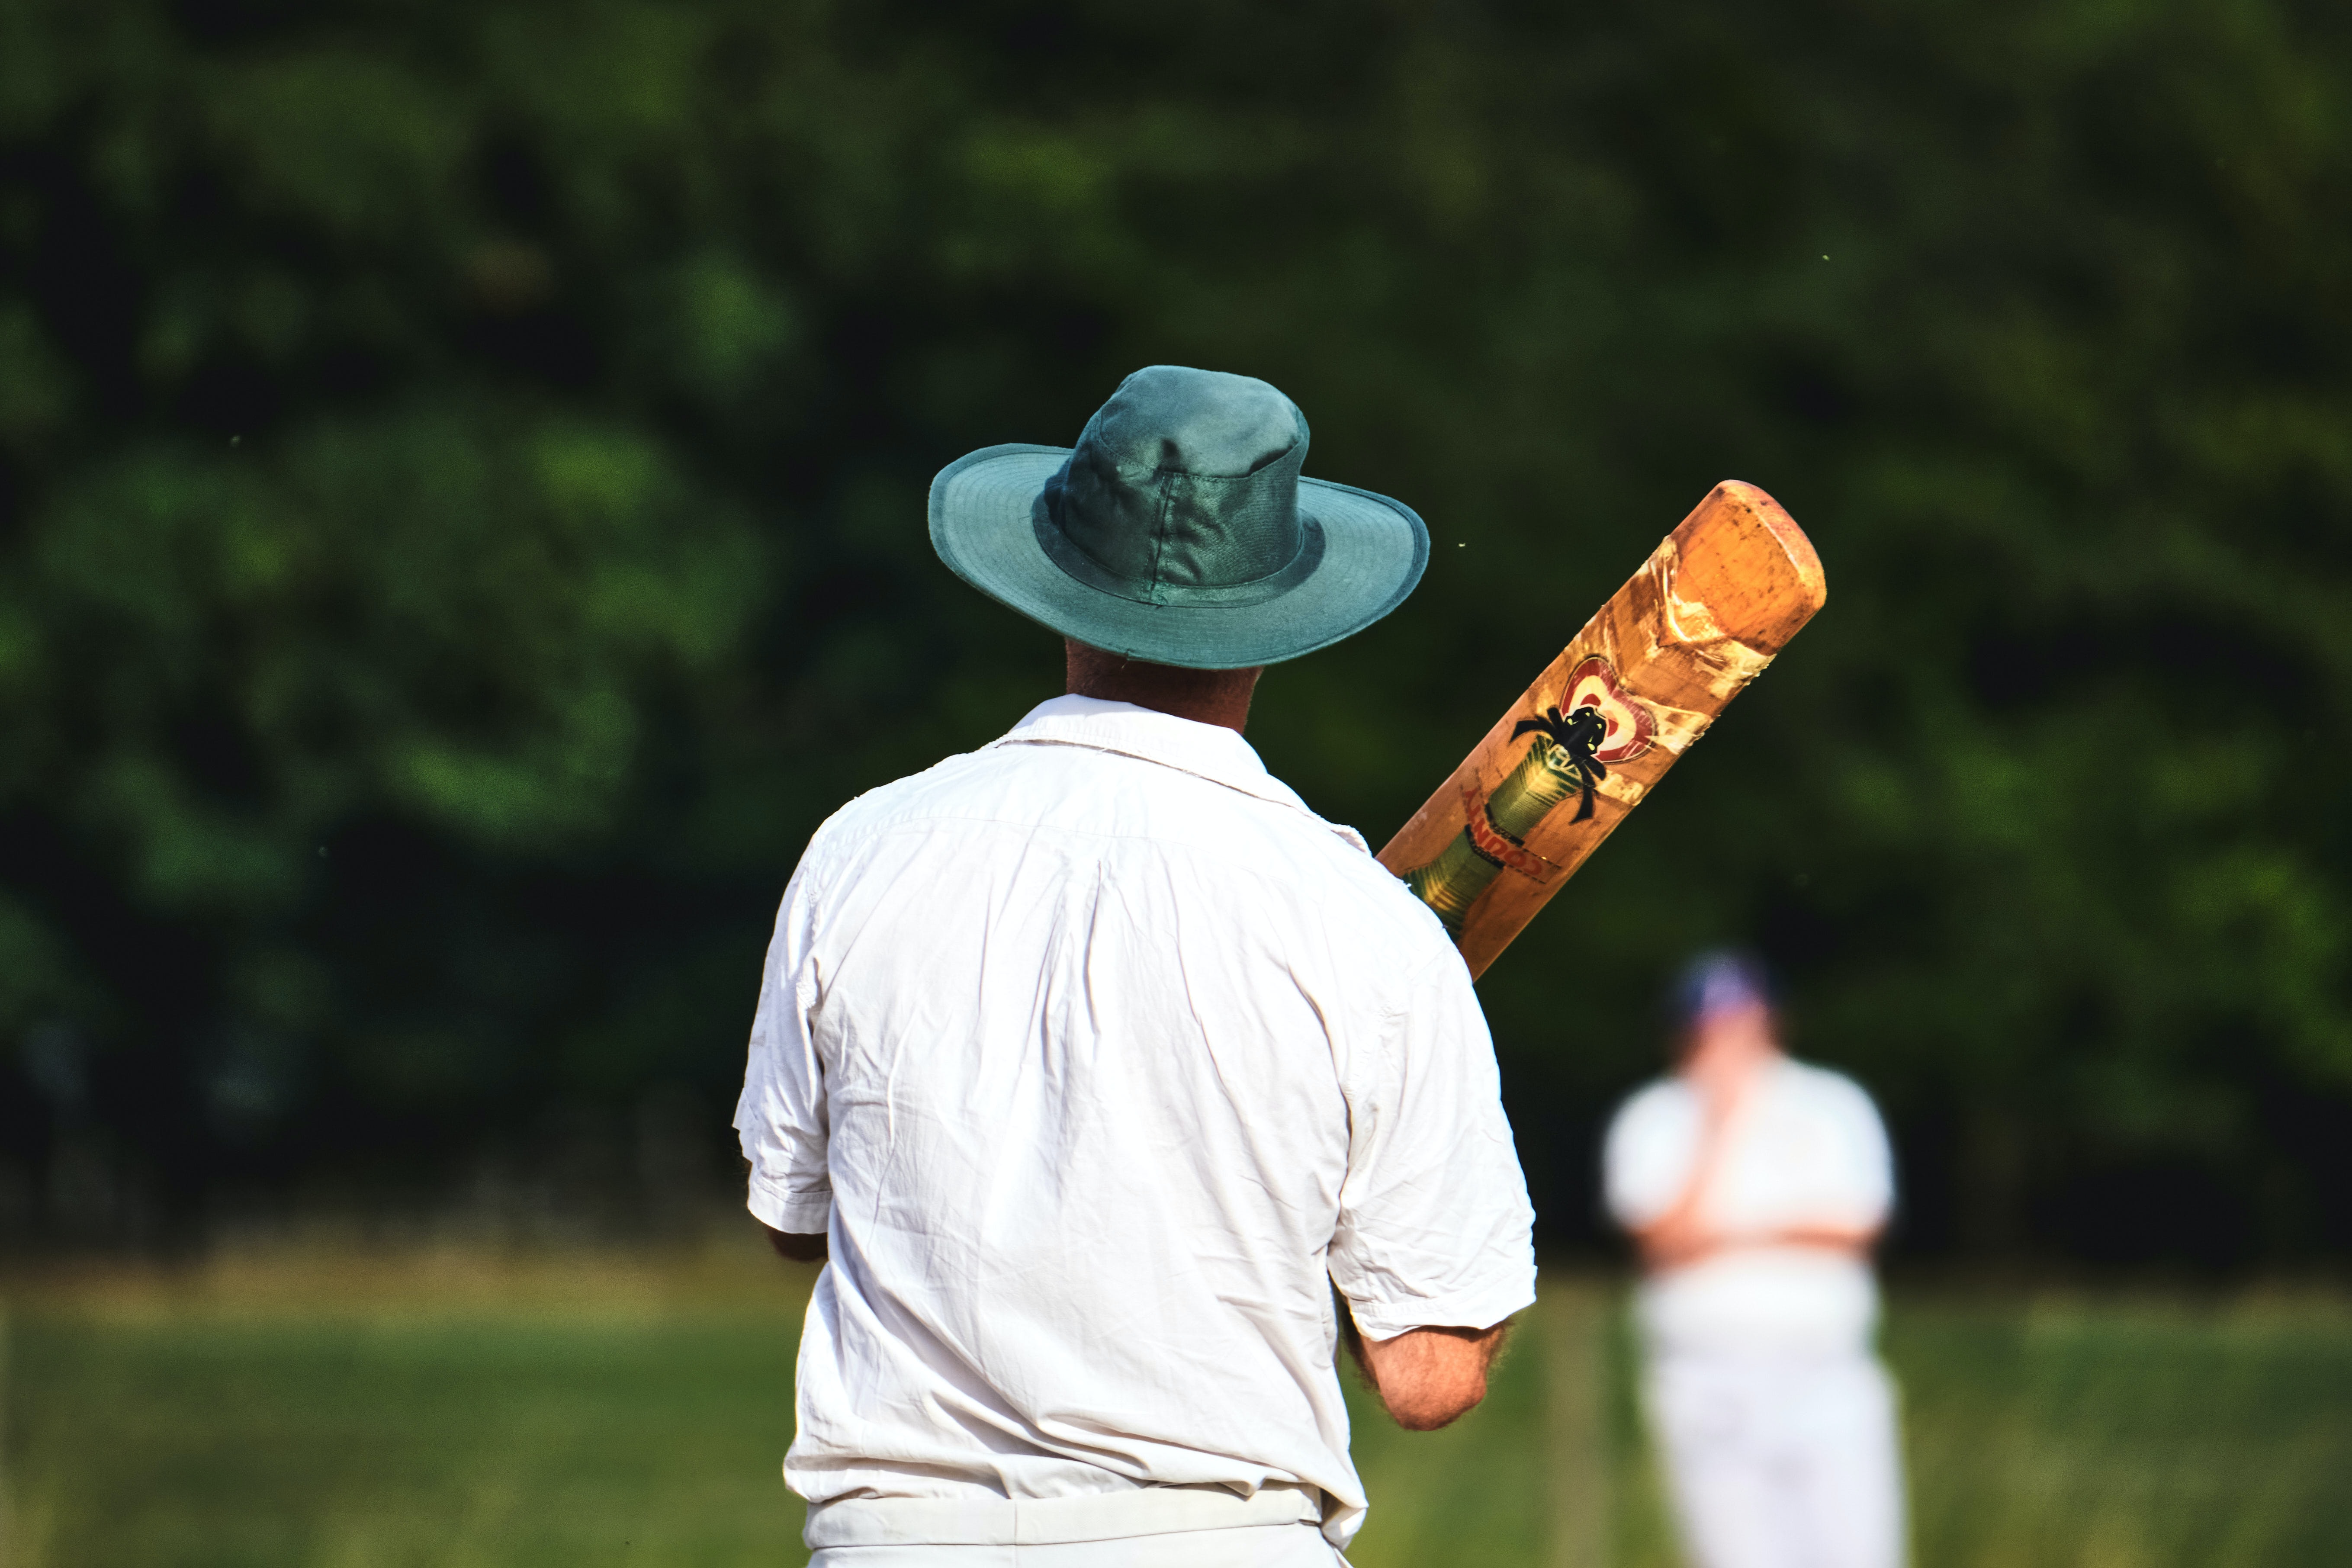 10 Things You Should Have in Your Cricket Kit